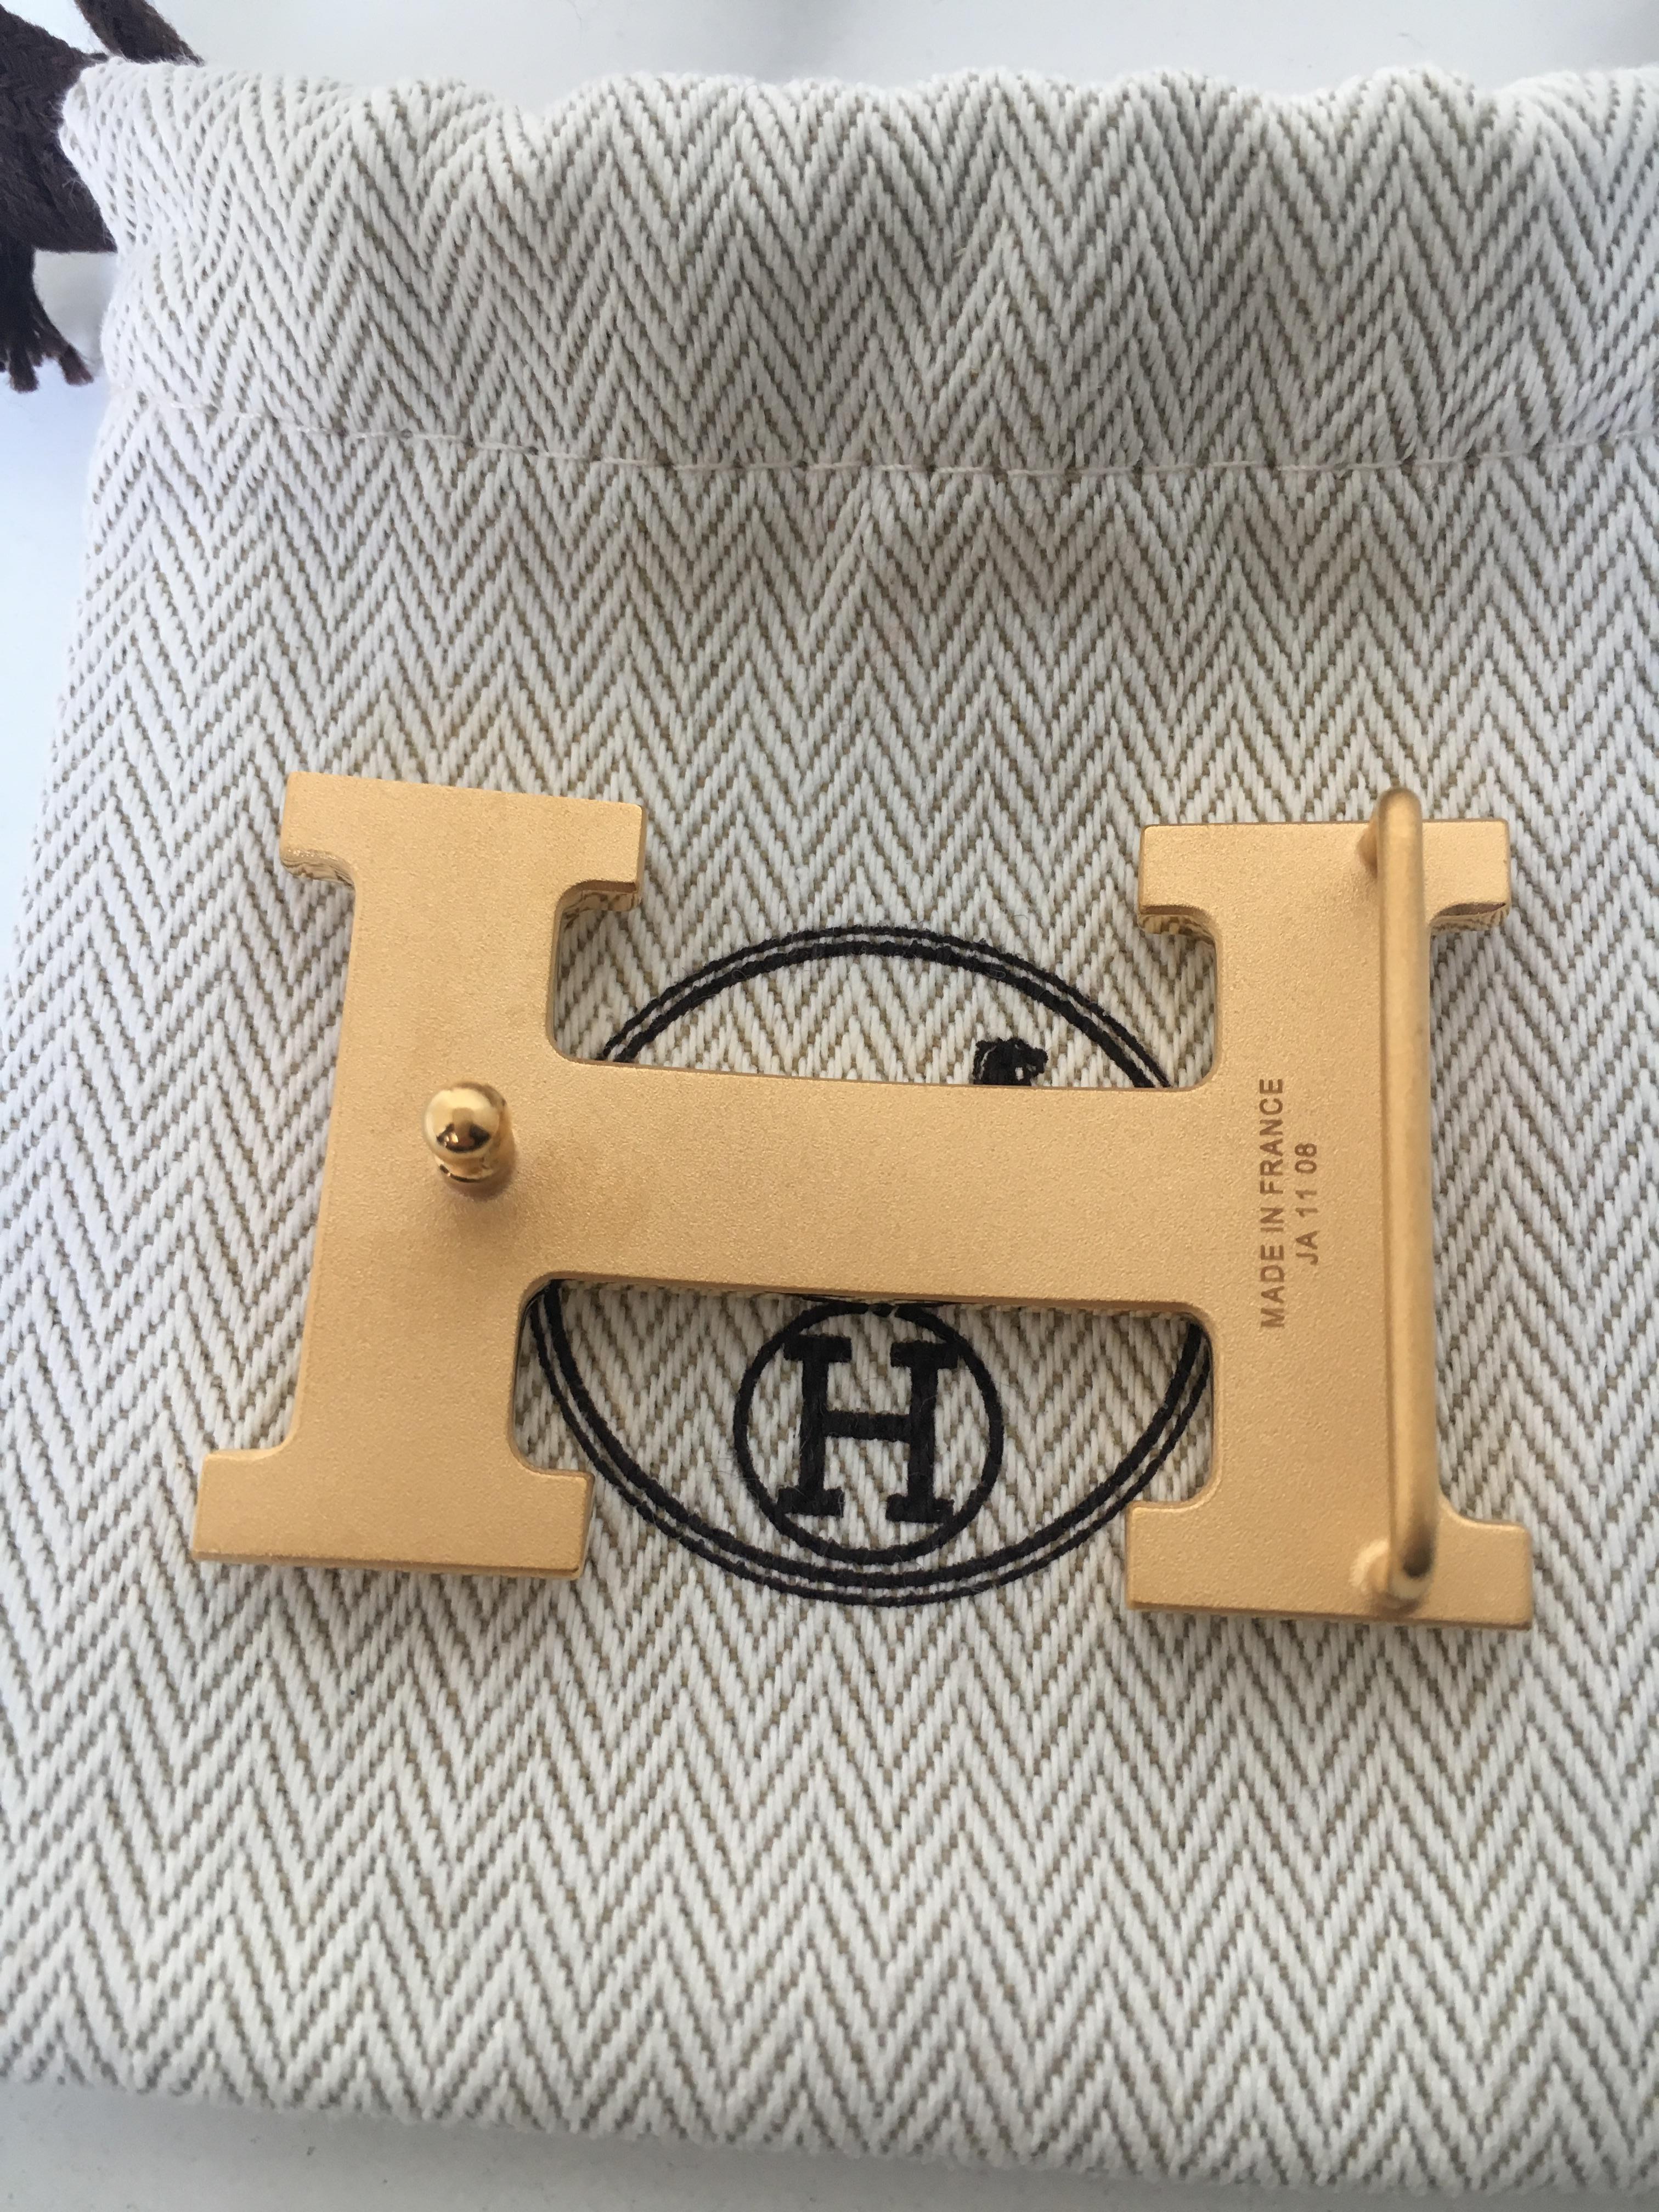 Hermes QUIZZ brushed GOLD color belt buckle 32mm.

This buckle will fit all 32mm wide belt leather by Hermes. 
The buckle is in super mint perfect condition.